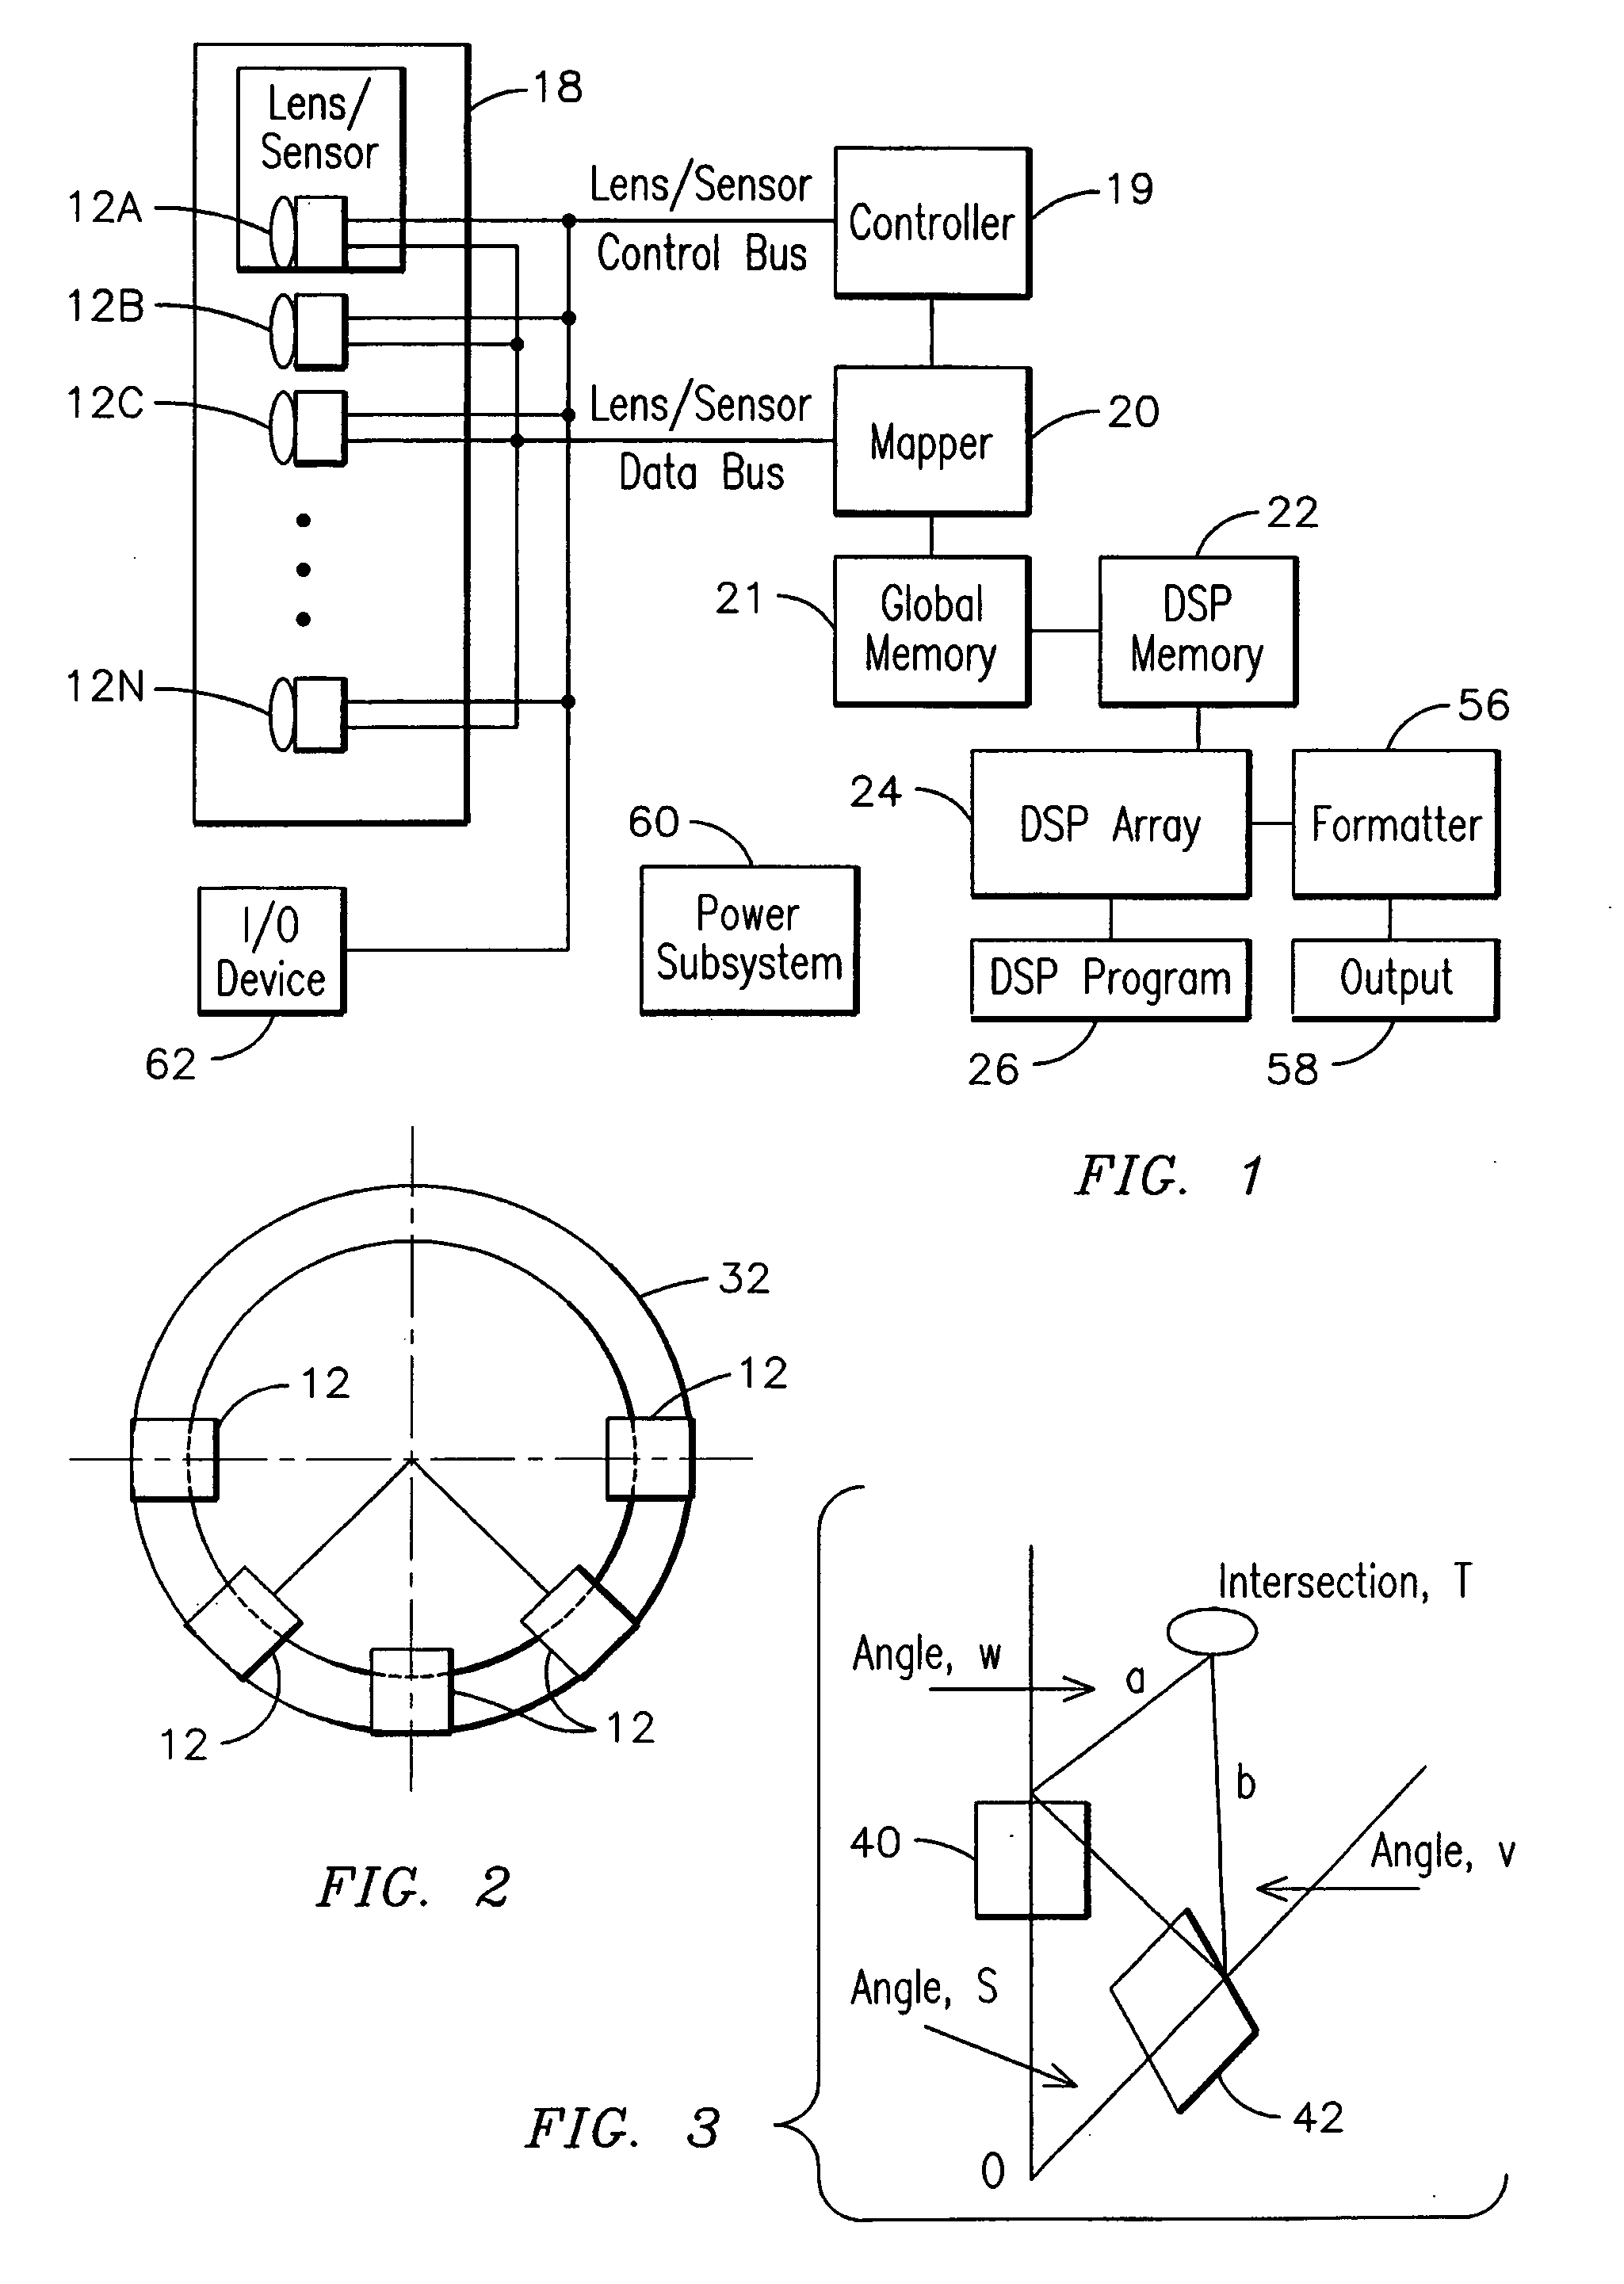 Digital imaging system for creating a wide-angle image from multiple narrow angle images